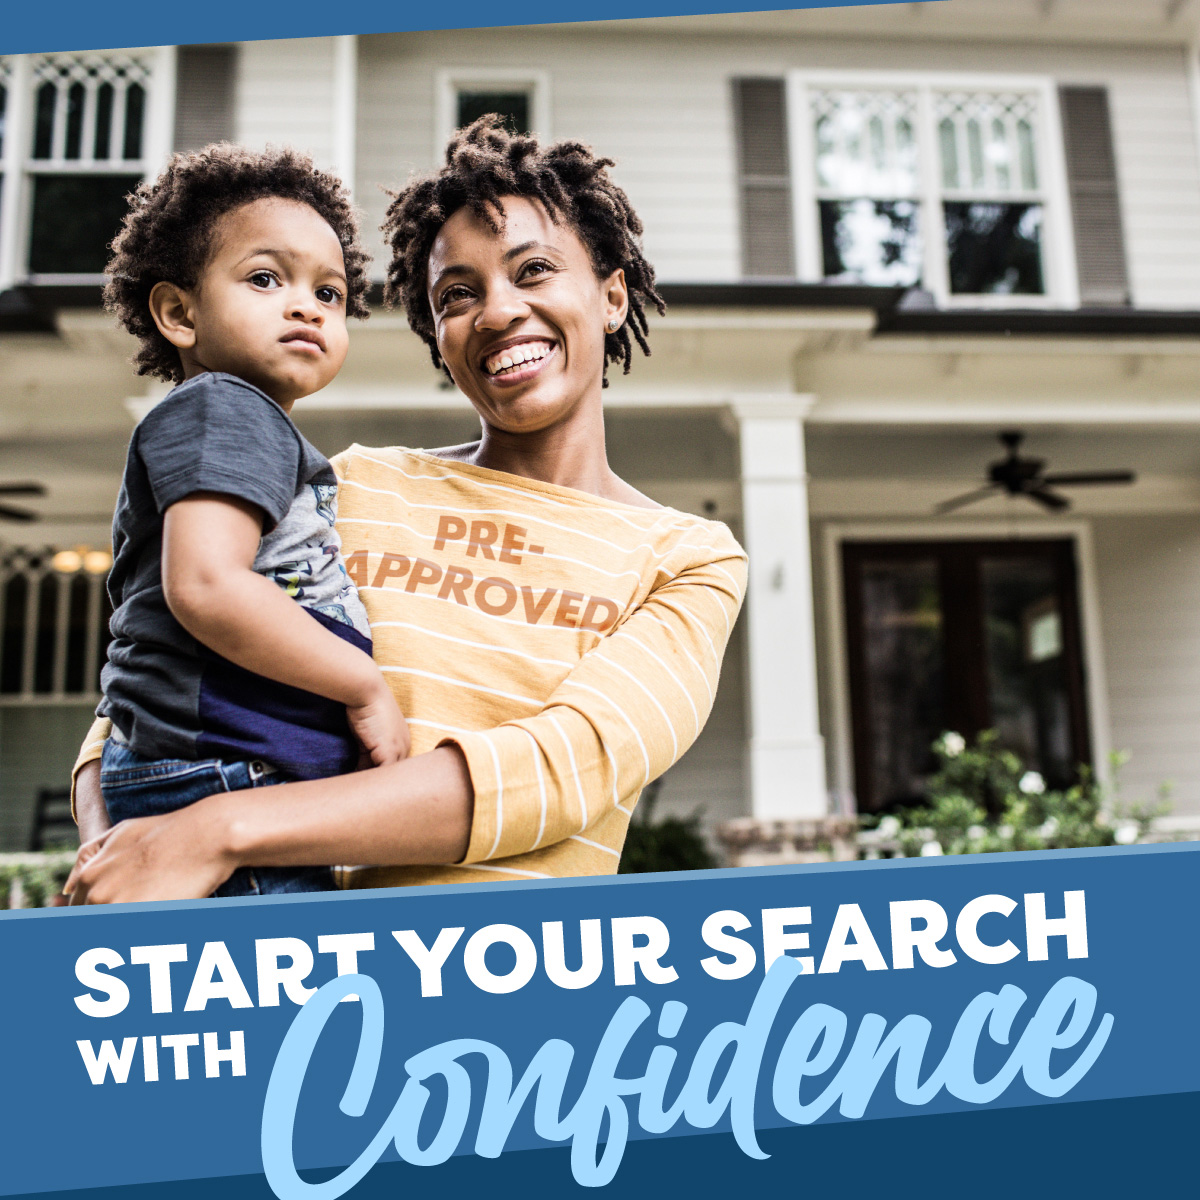 First-time homebuyers often start house hunting before getting pre-approved for a mortgage, which can lead to disappointment. DM us to get started today! 🏡💰📞

🐺🐺🐺🐺
#Loanwolflending
#Mortgagebroker
#Homeloanswithabite
#Abetterbreedofhomeloans